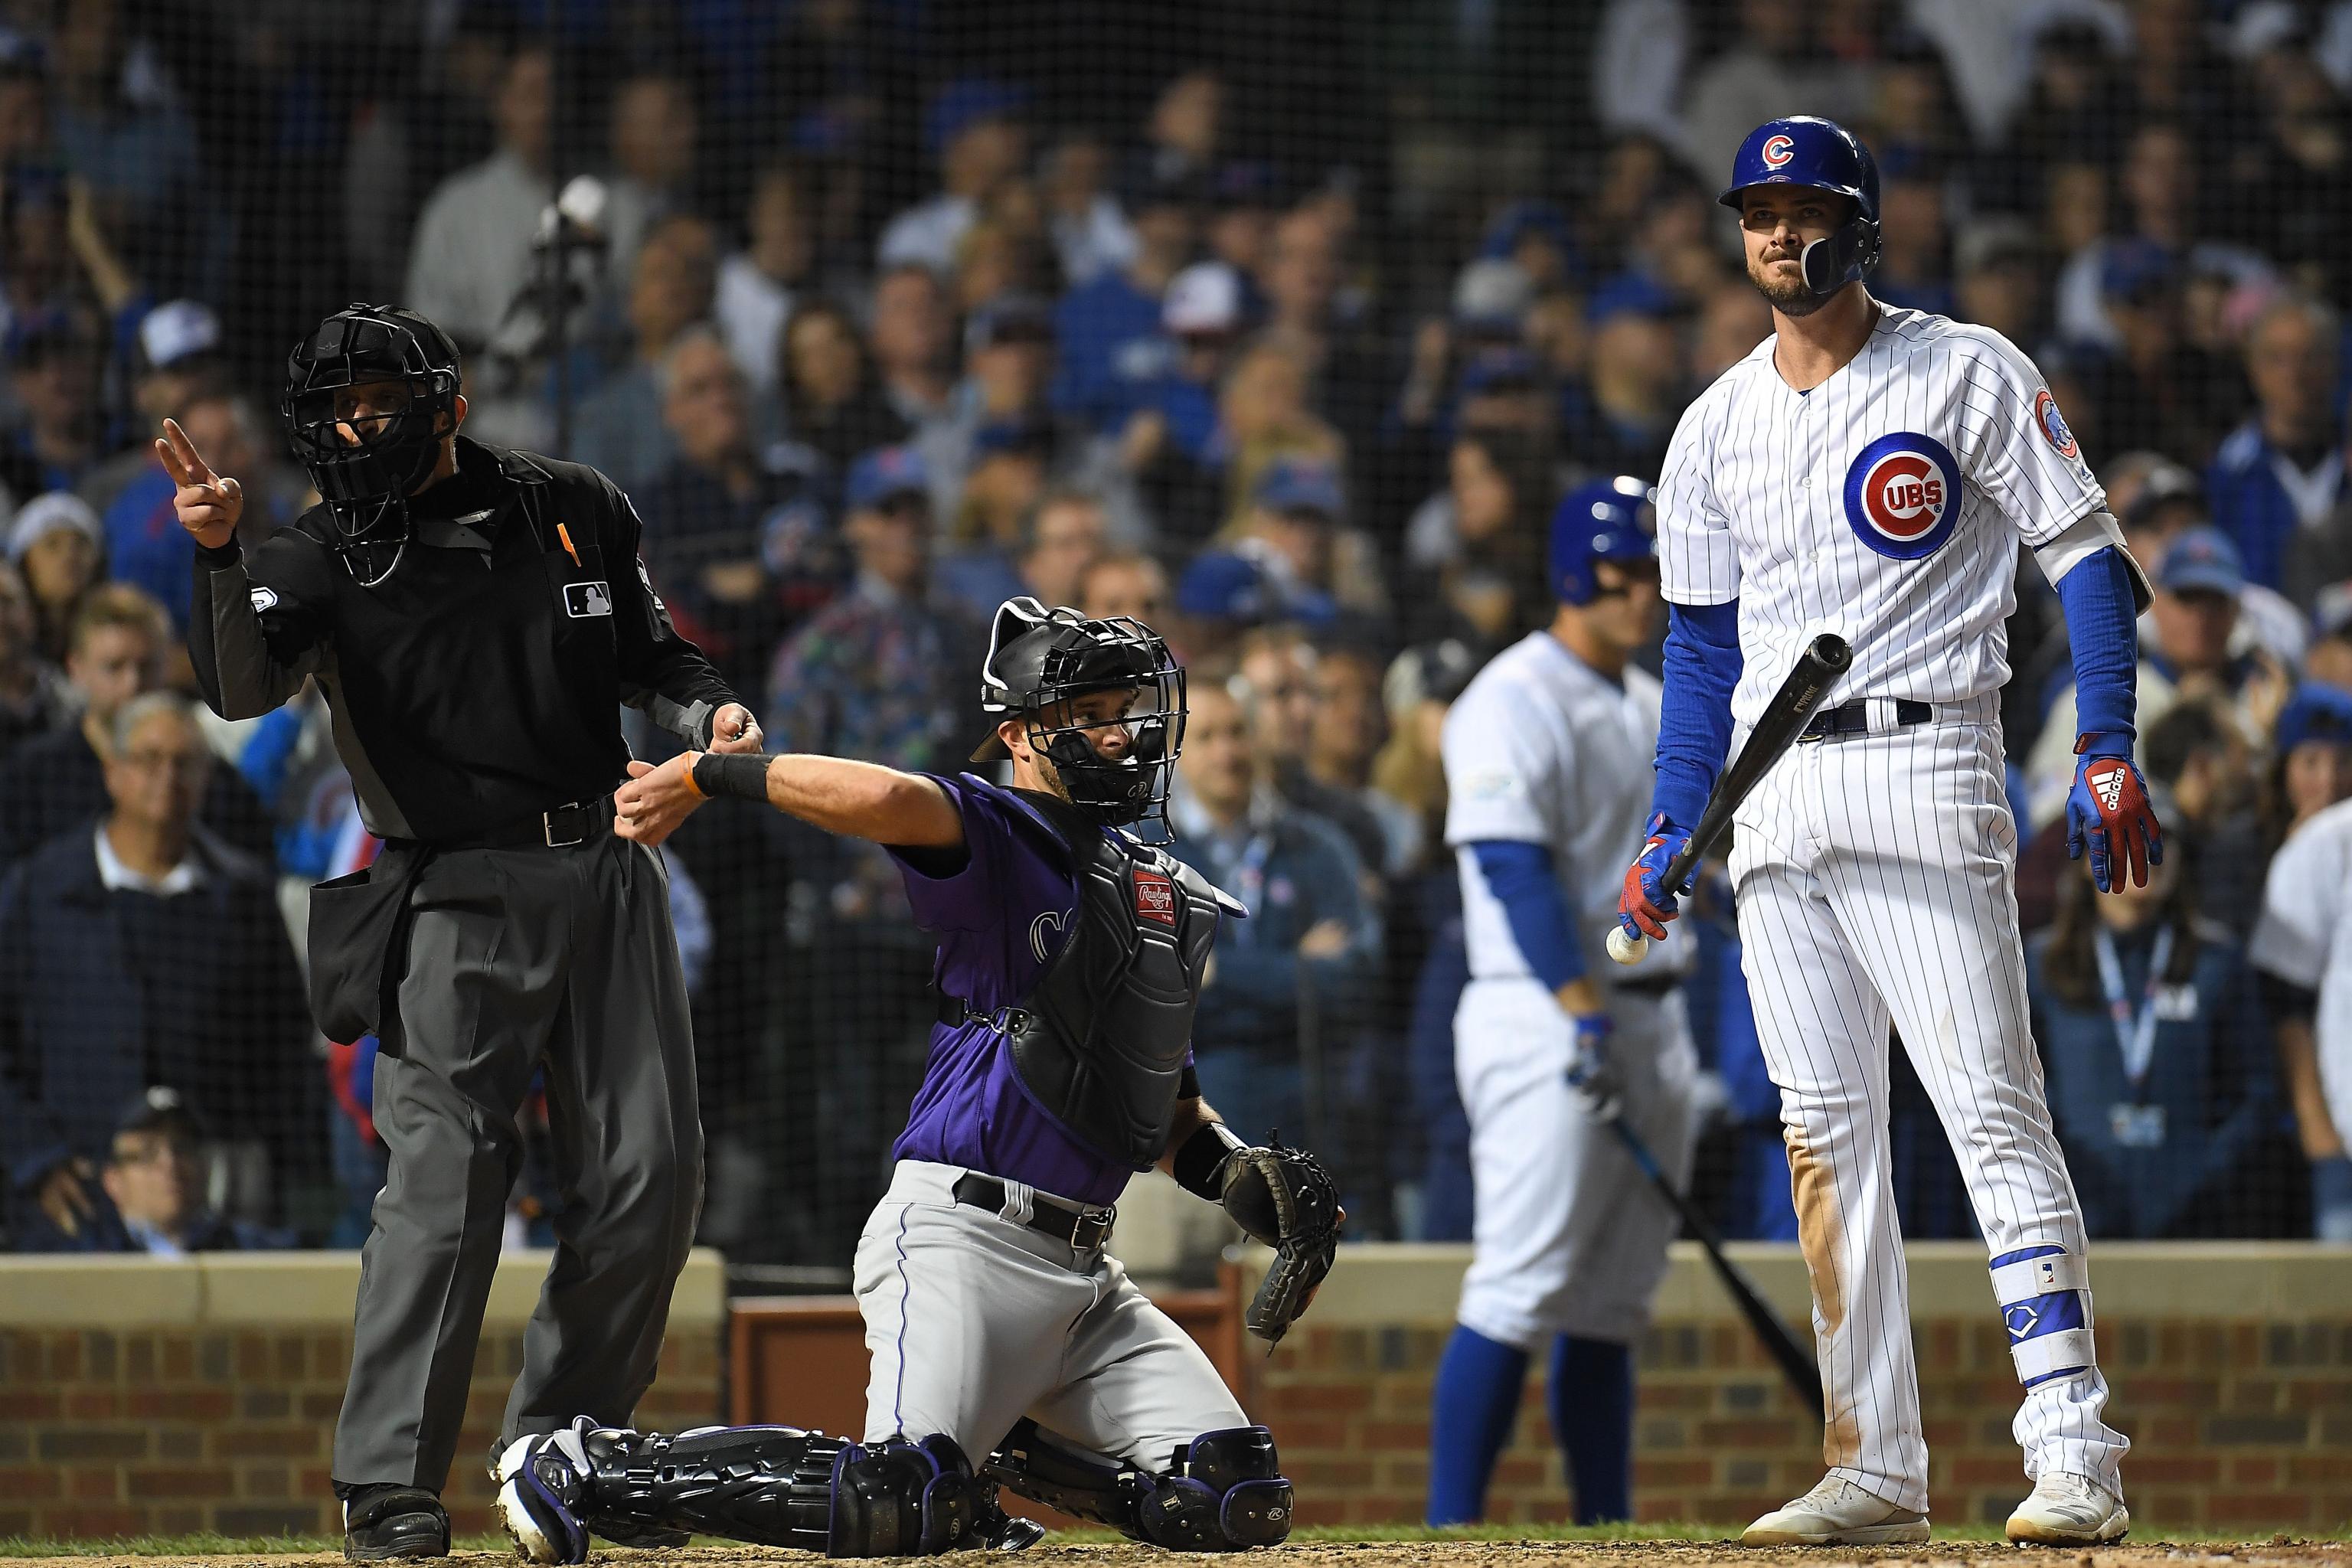 NYSportsJournalism.com - MLB Cubbie Kris Bryant At Bat With Express - MLB  Cubbies Swinger Kris Bryant Gets His Smooth On With Express Clothing Deal